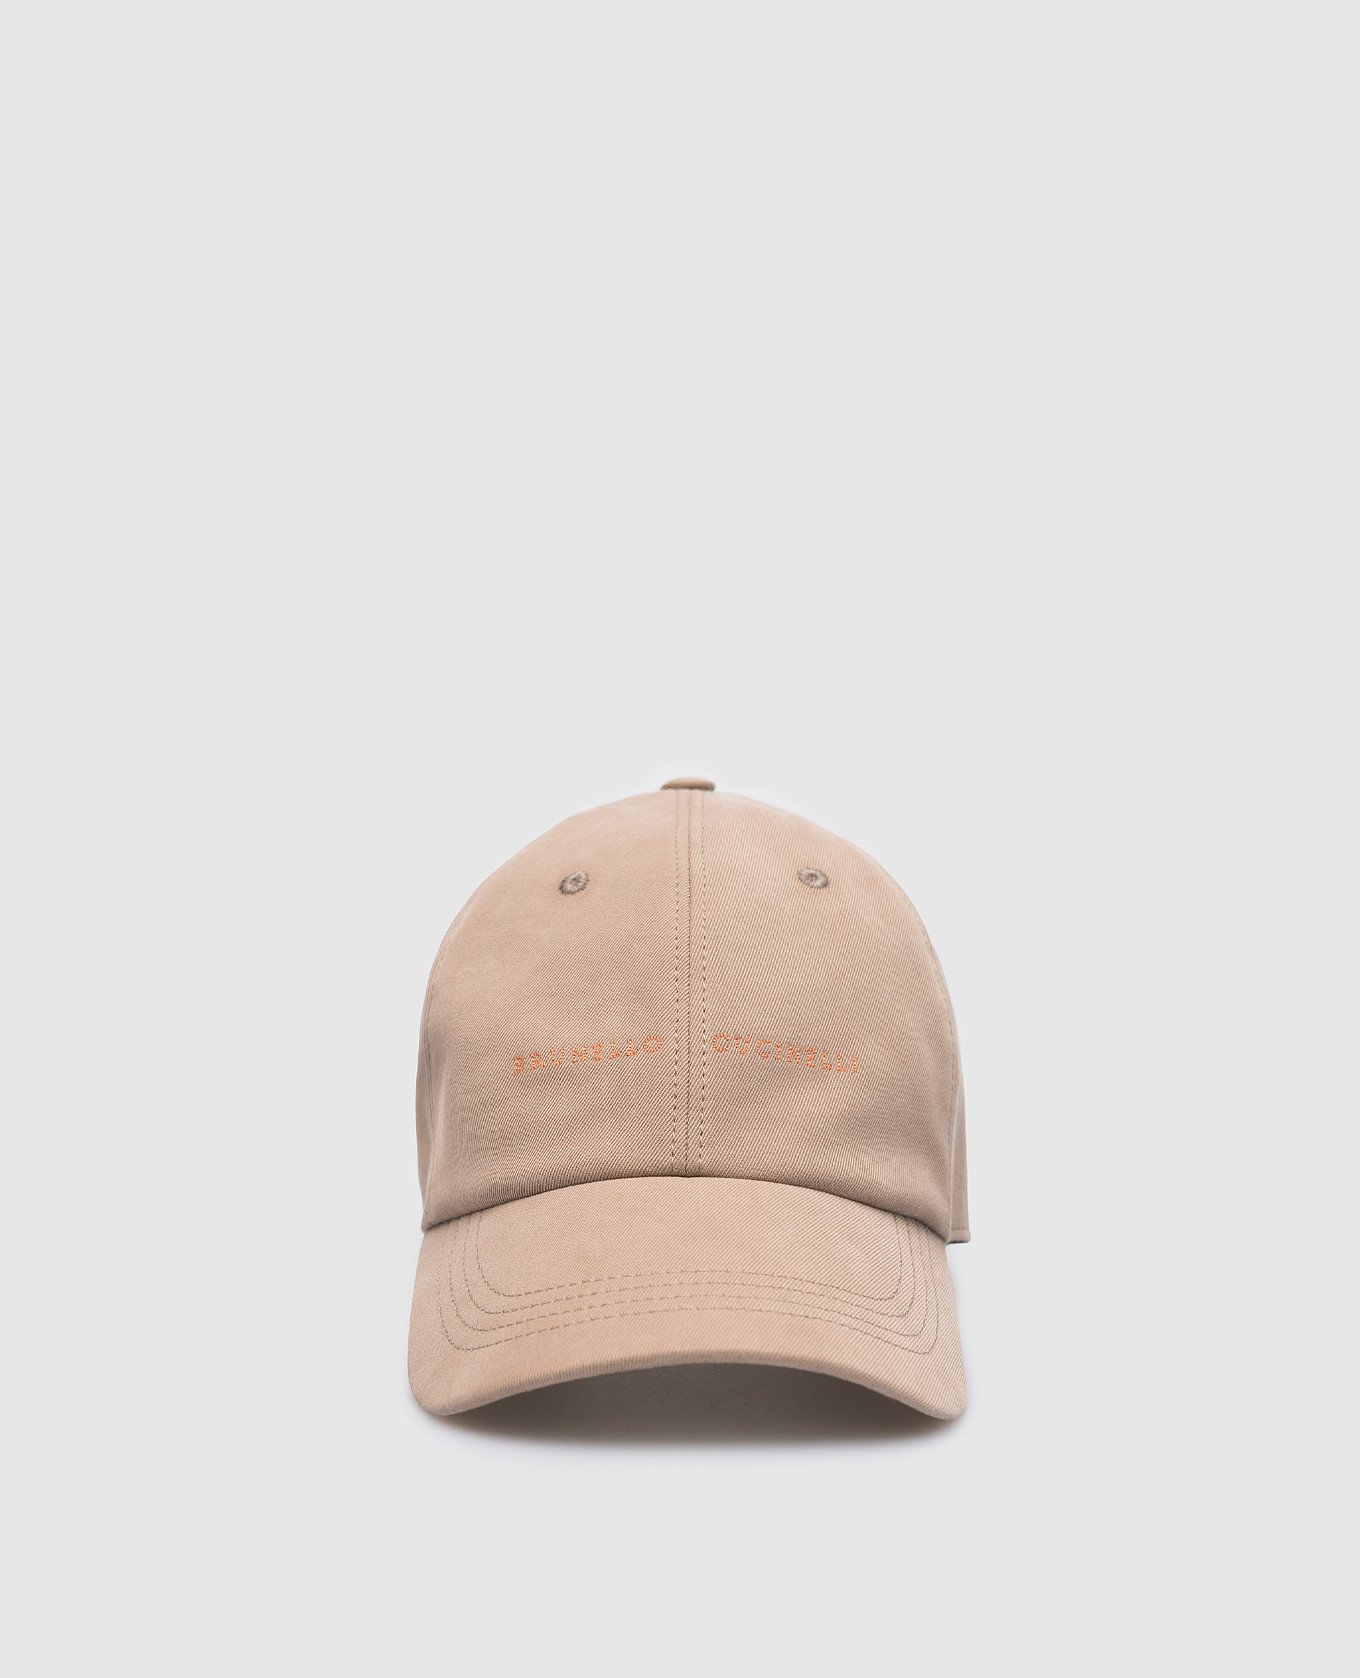 Brown cap with logo embroidery